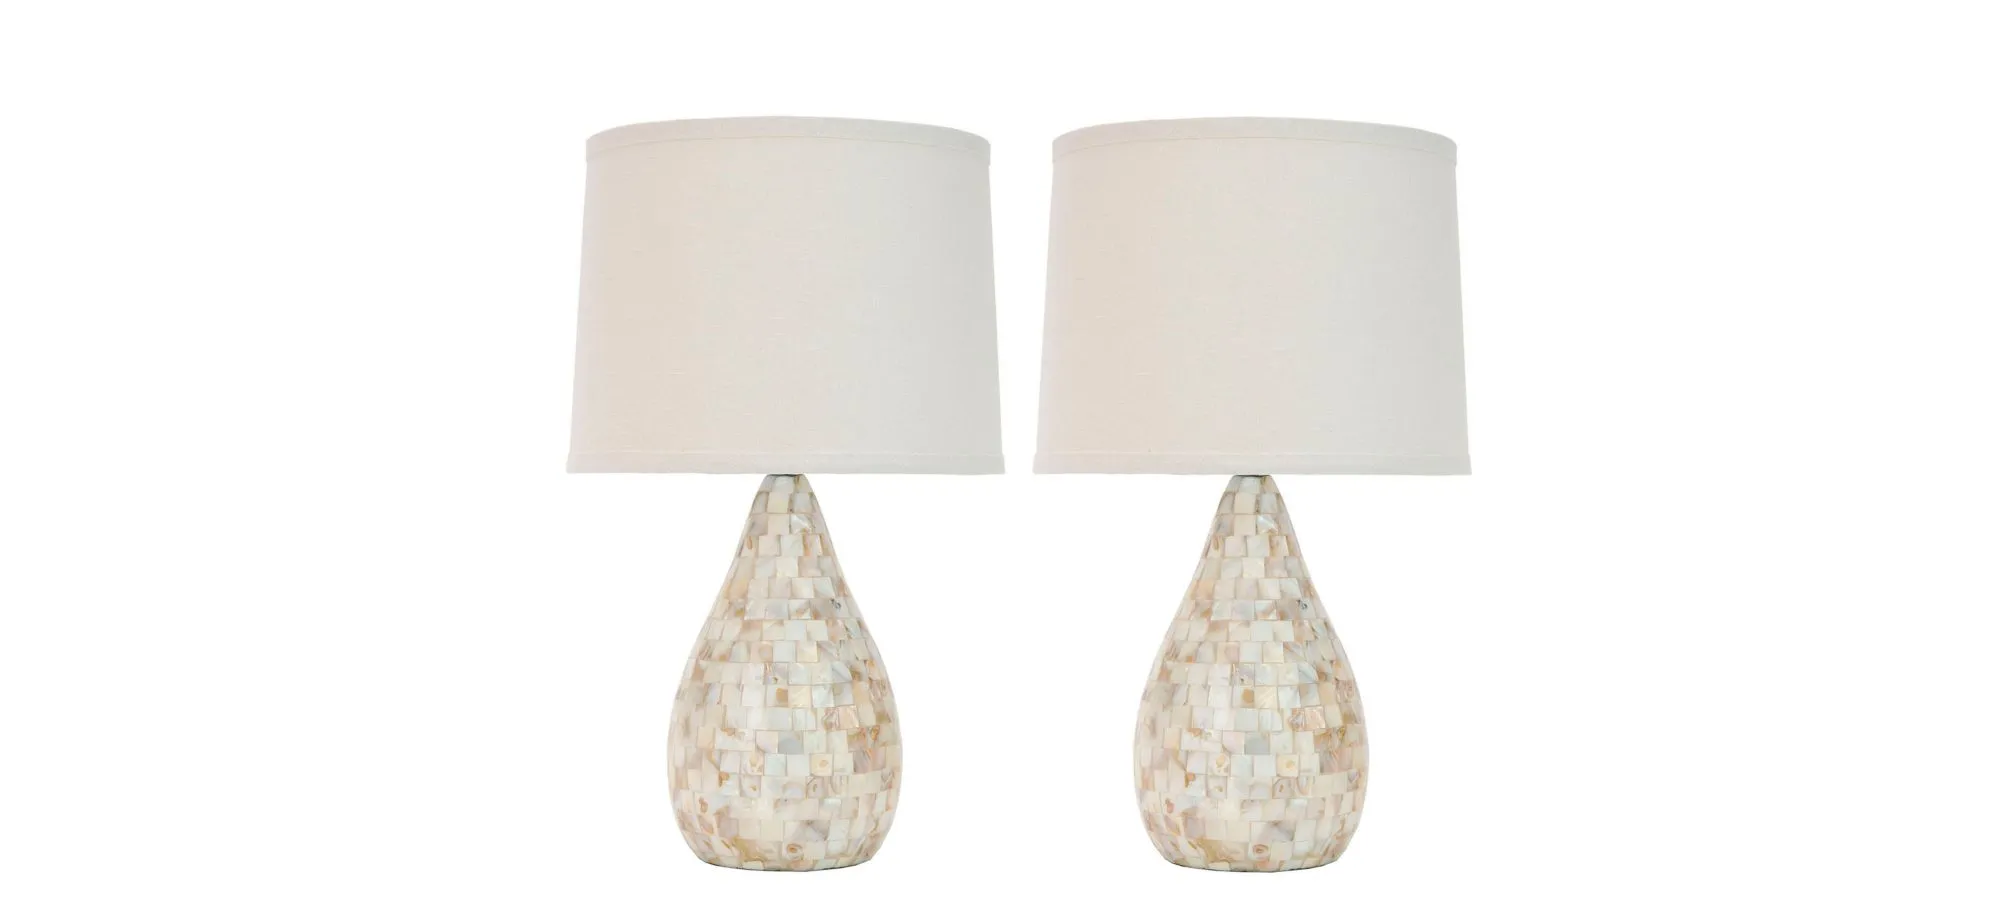 Lauralie Shell Table Lamps: Set of 2 in Cream by Safavieh